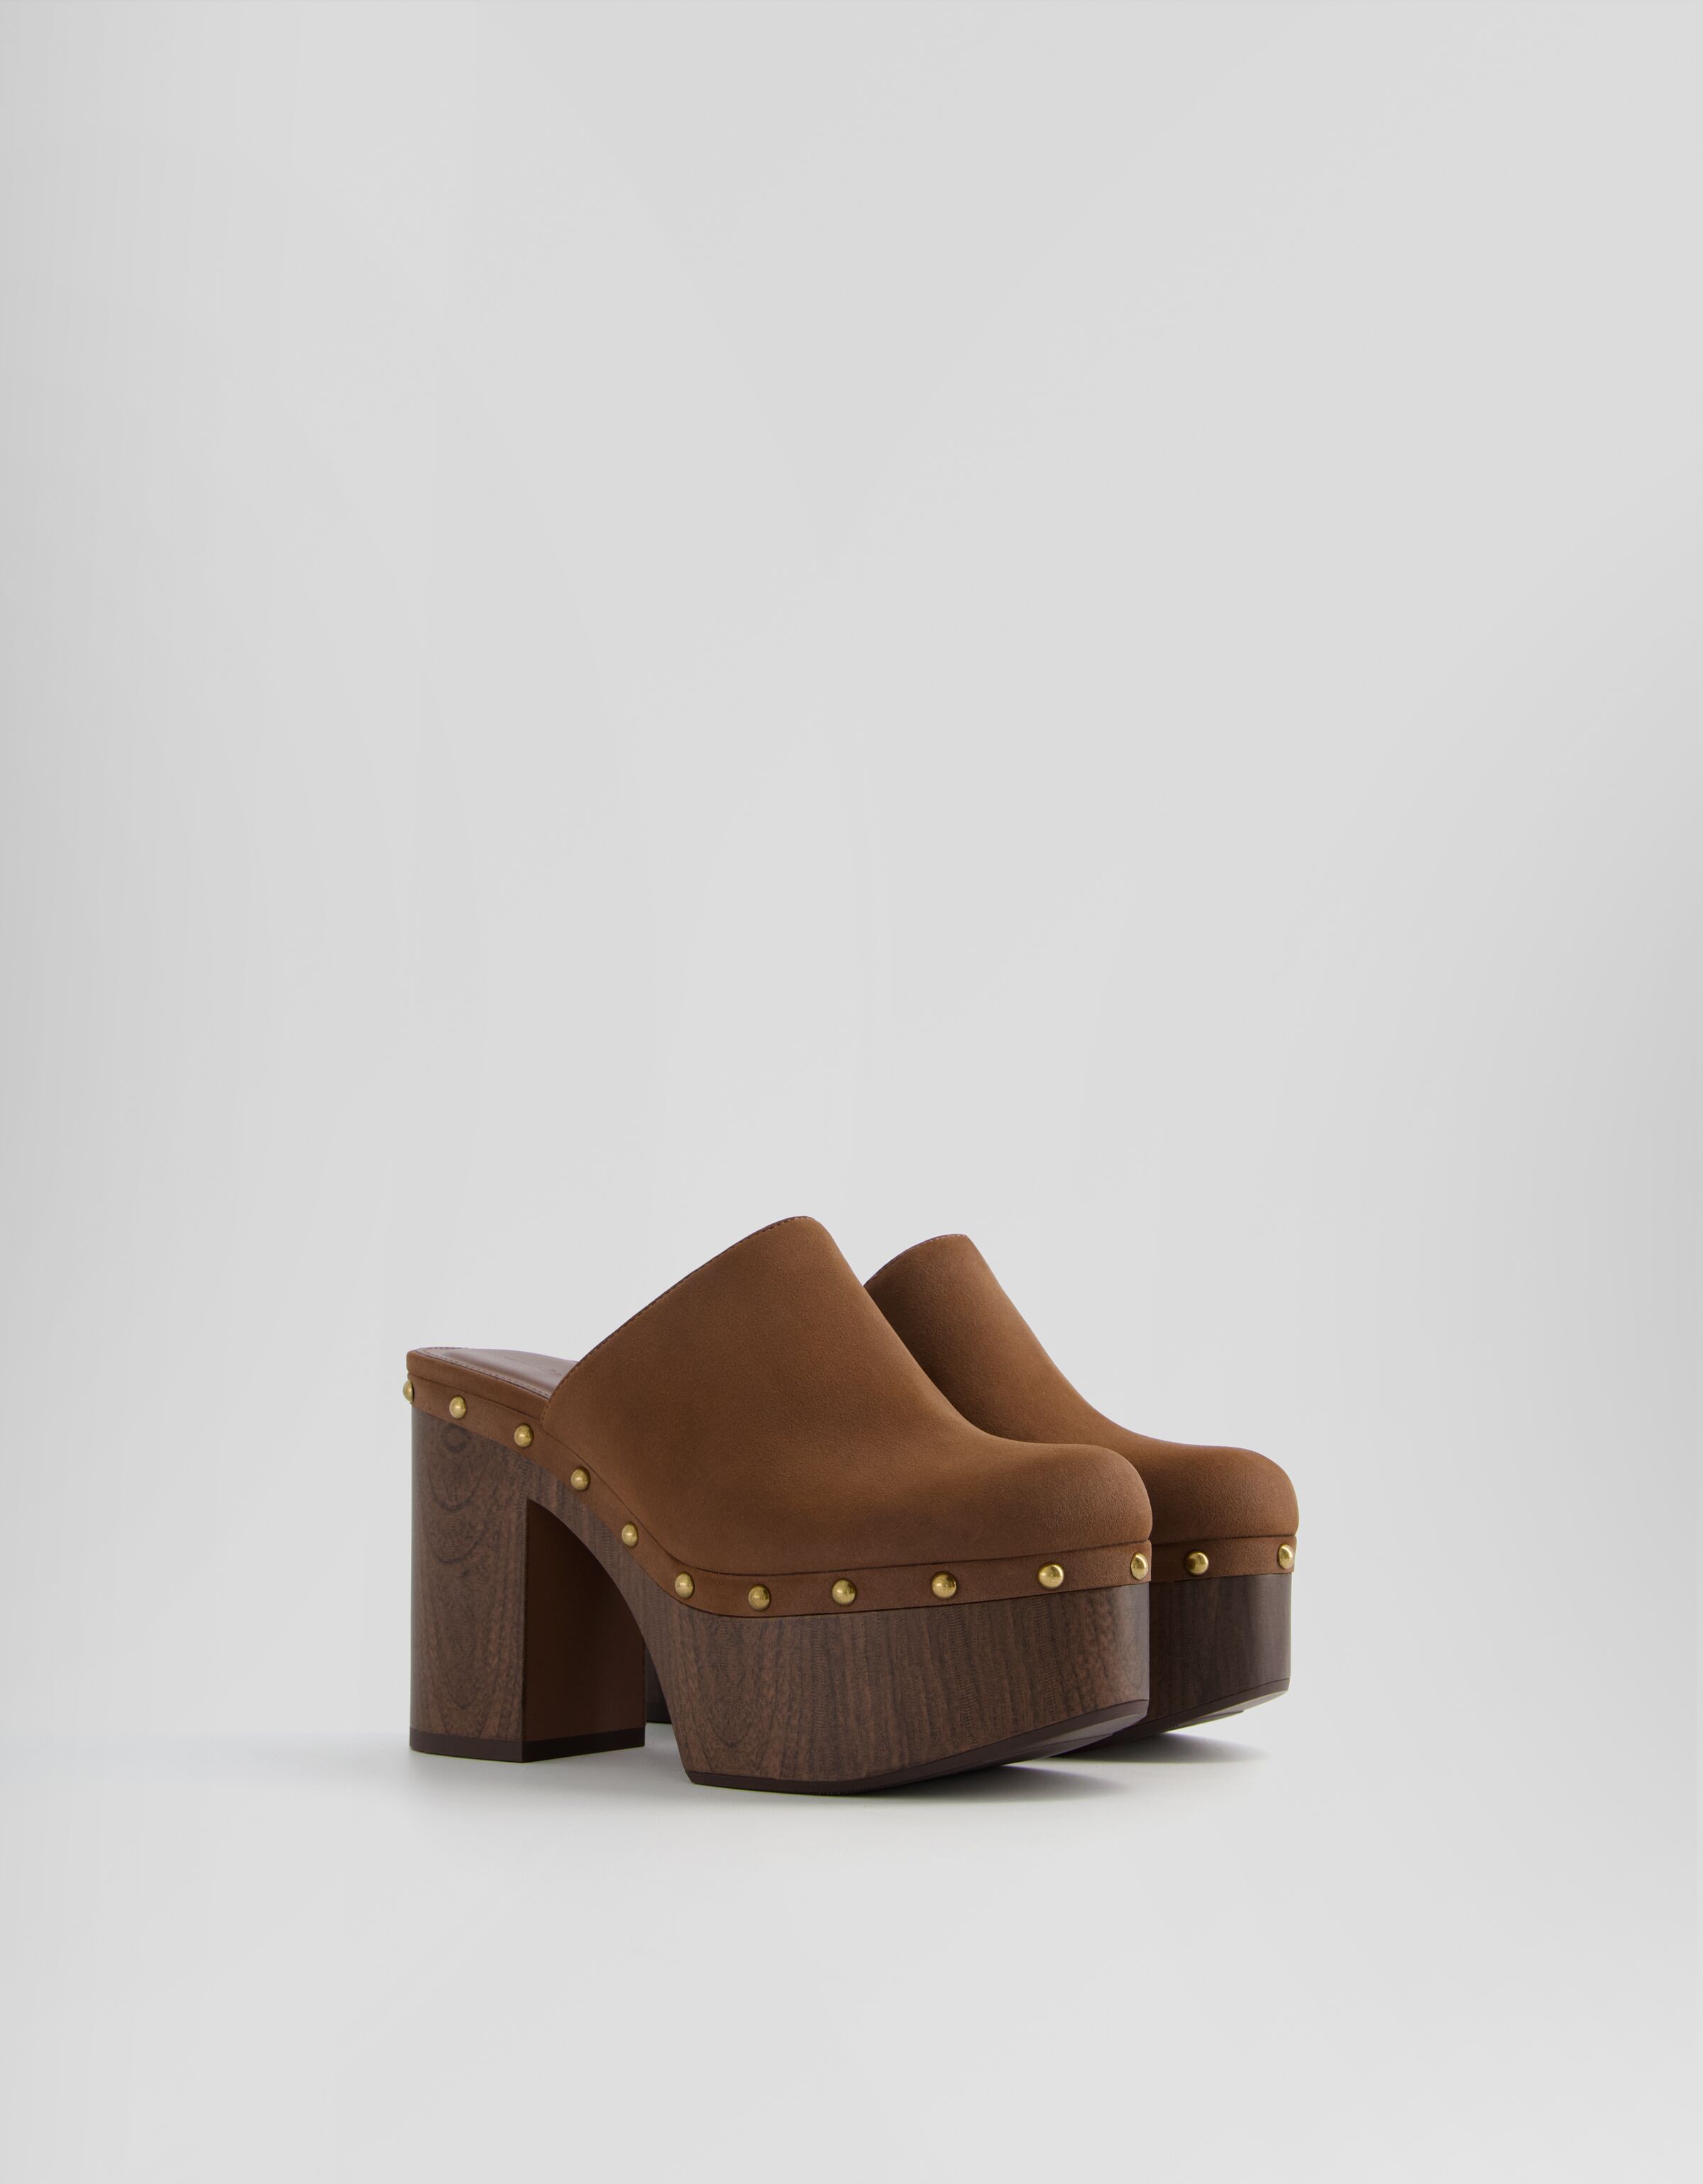 High Heel Two Strap Sandal in Vegetable Tanned Leather – Tessa Clogs /  Swedish Clog Cabin